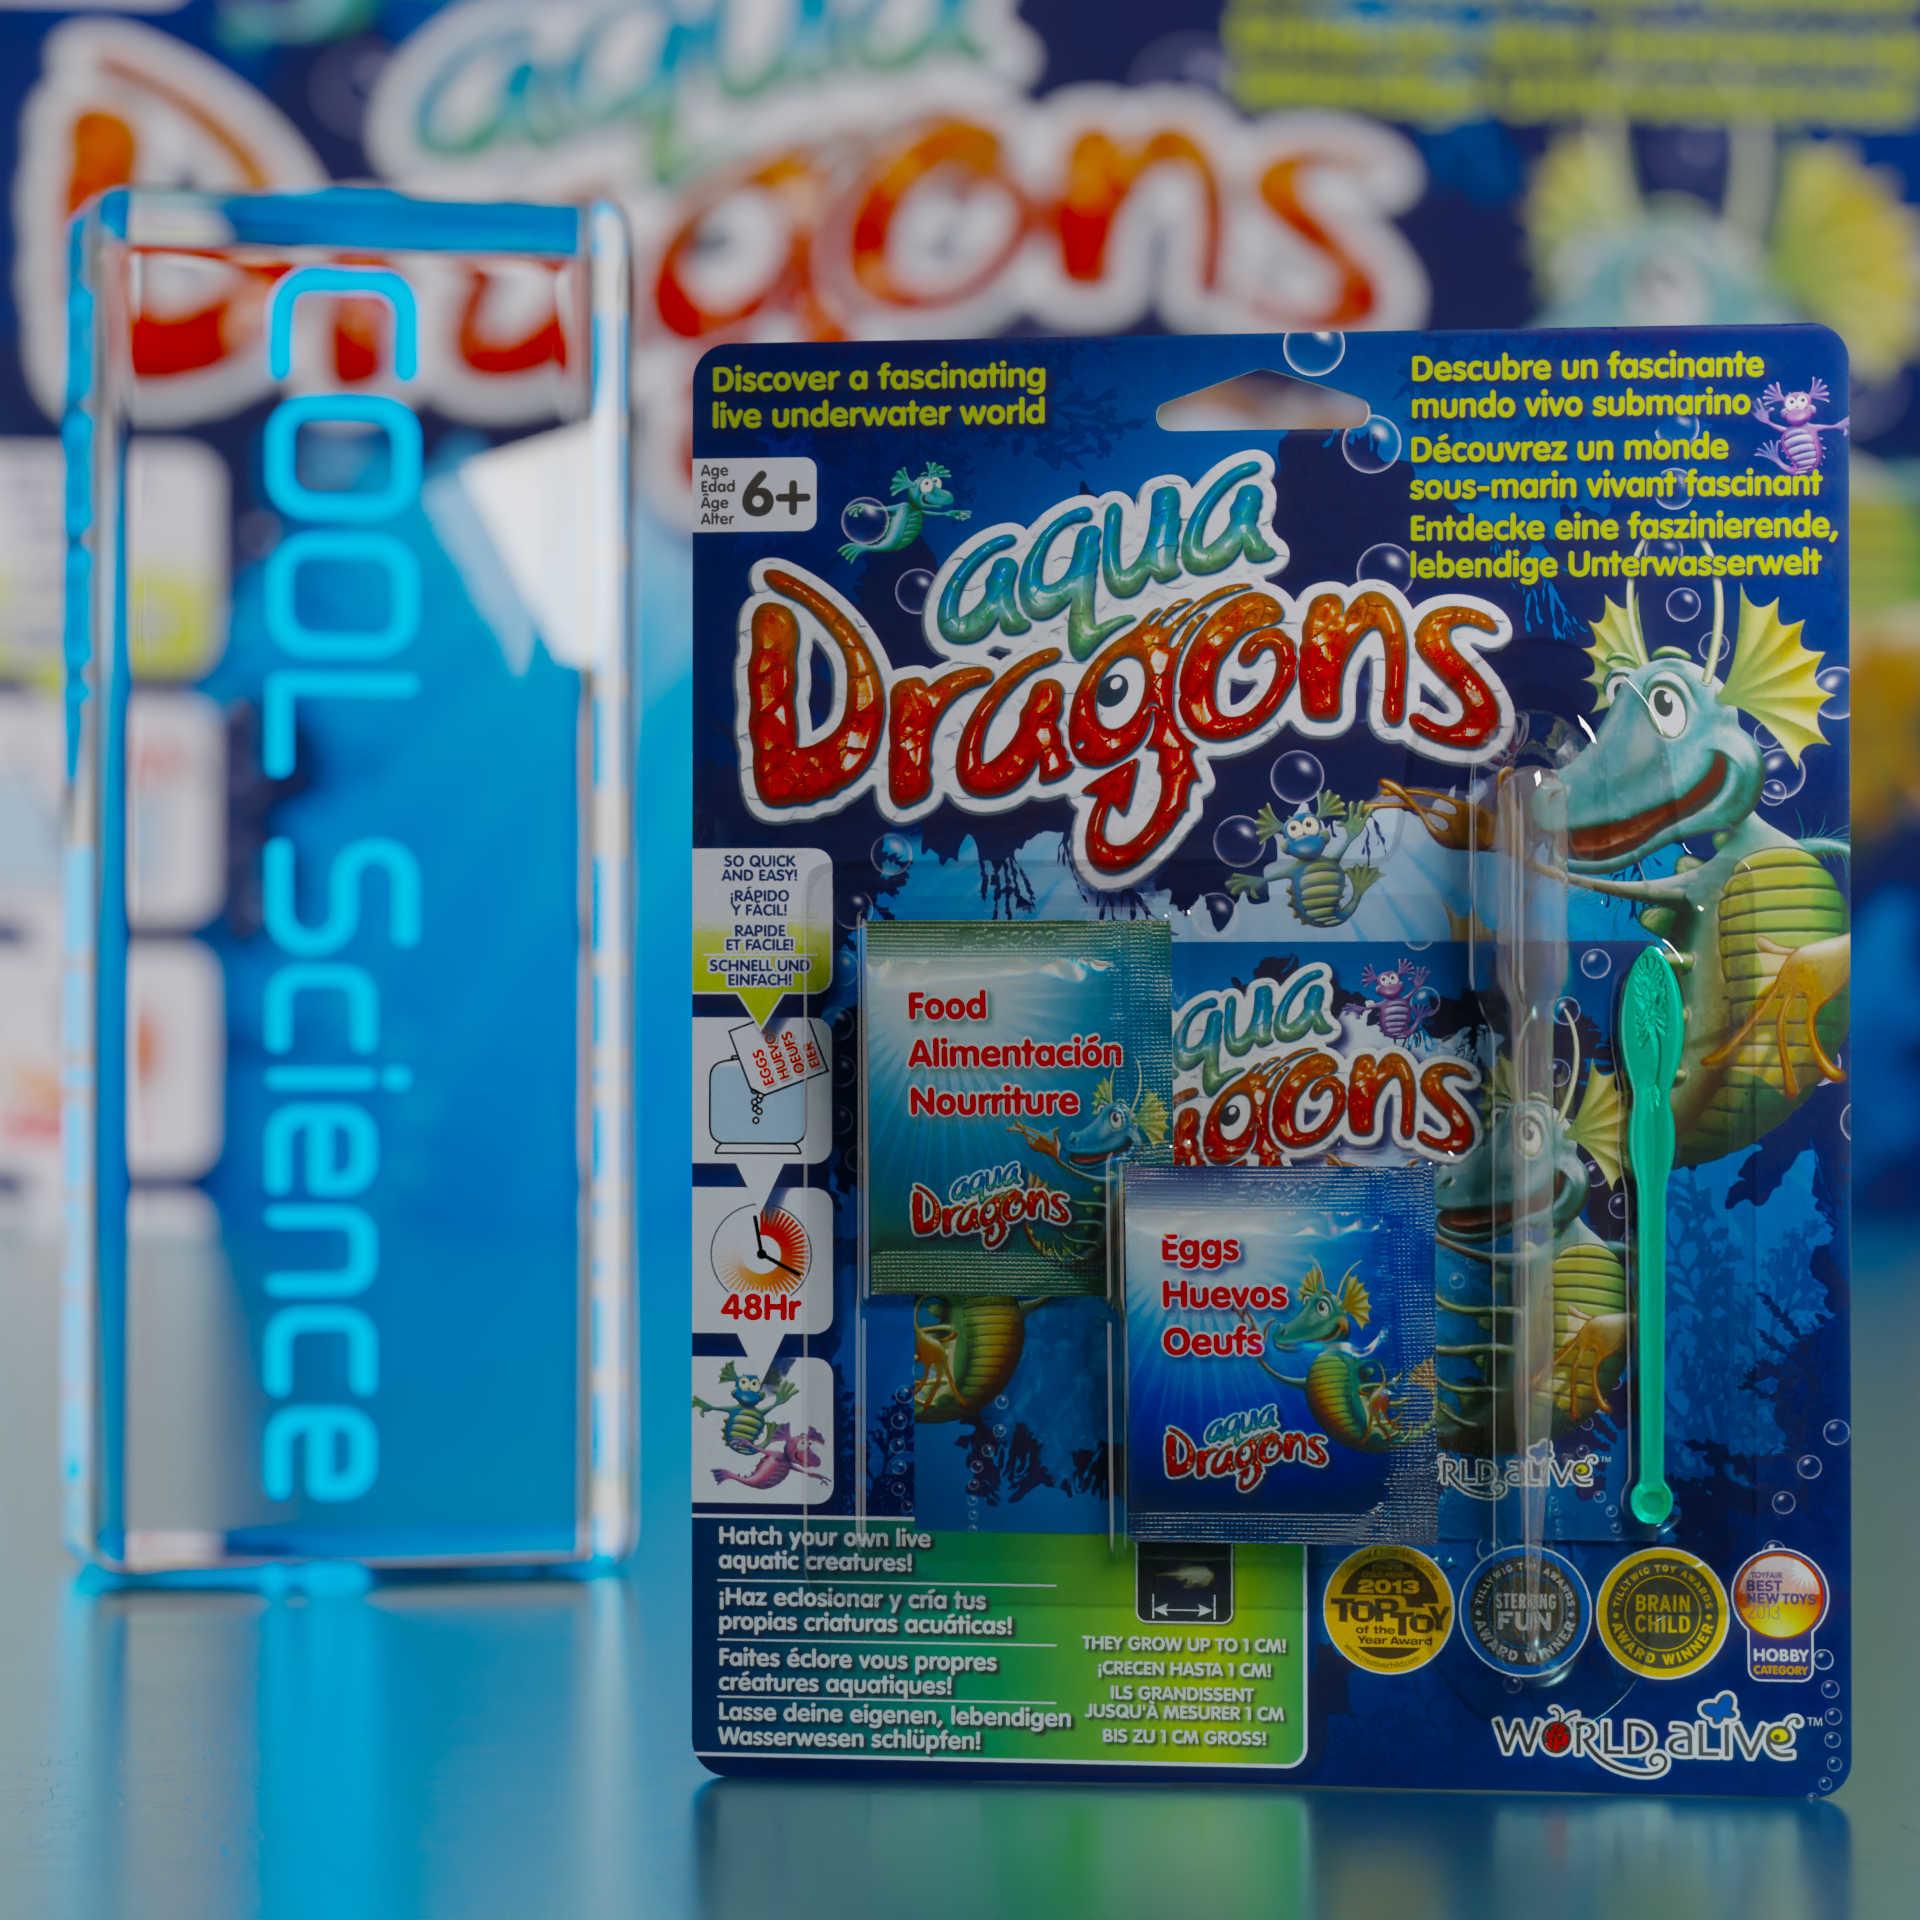 Front View of the Aqua Dragons Kit